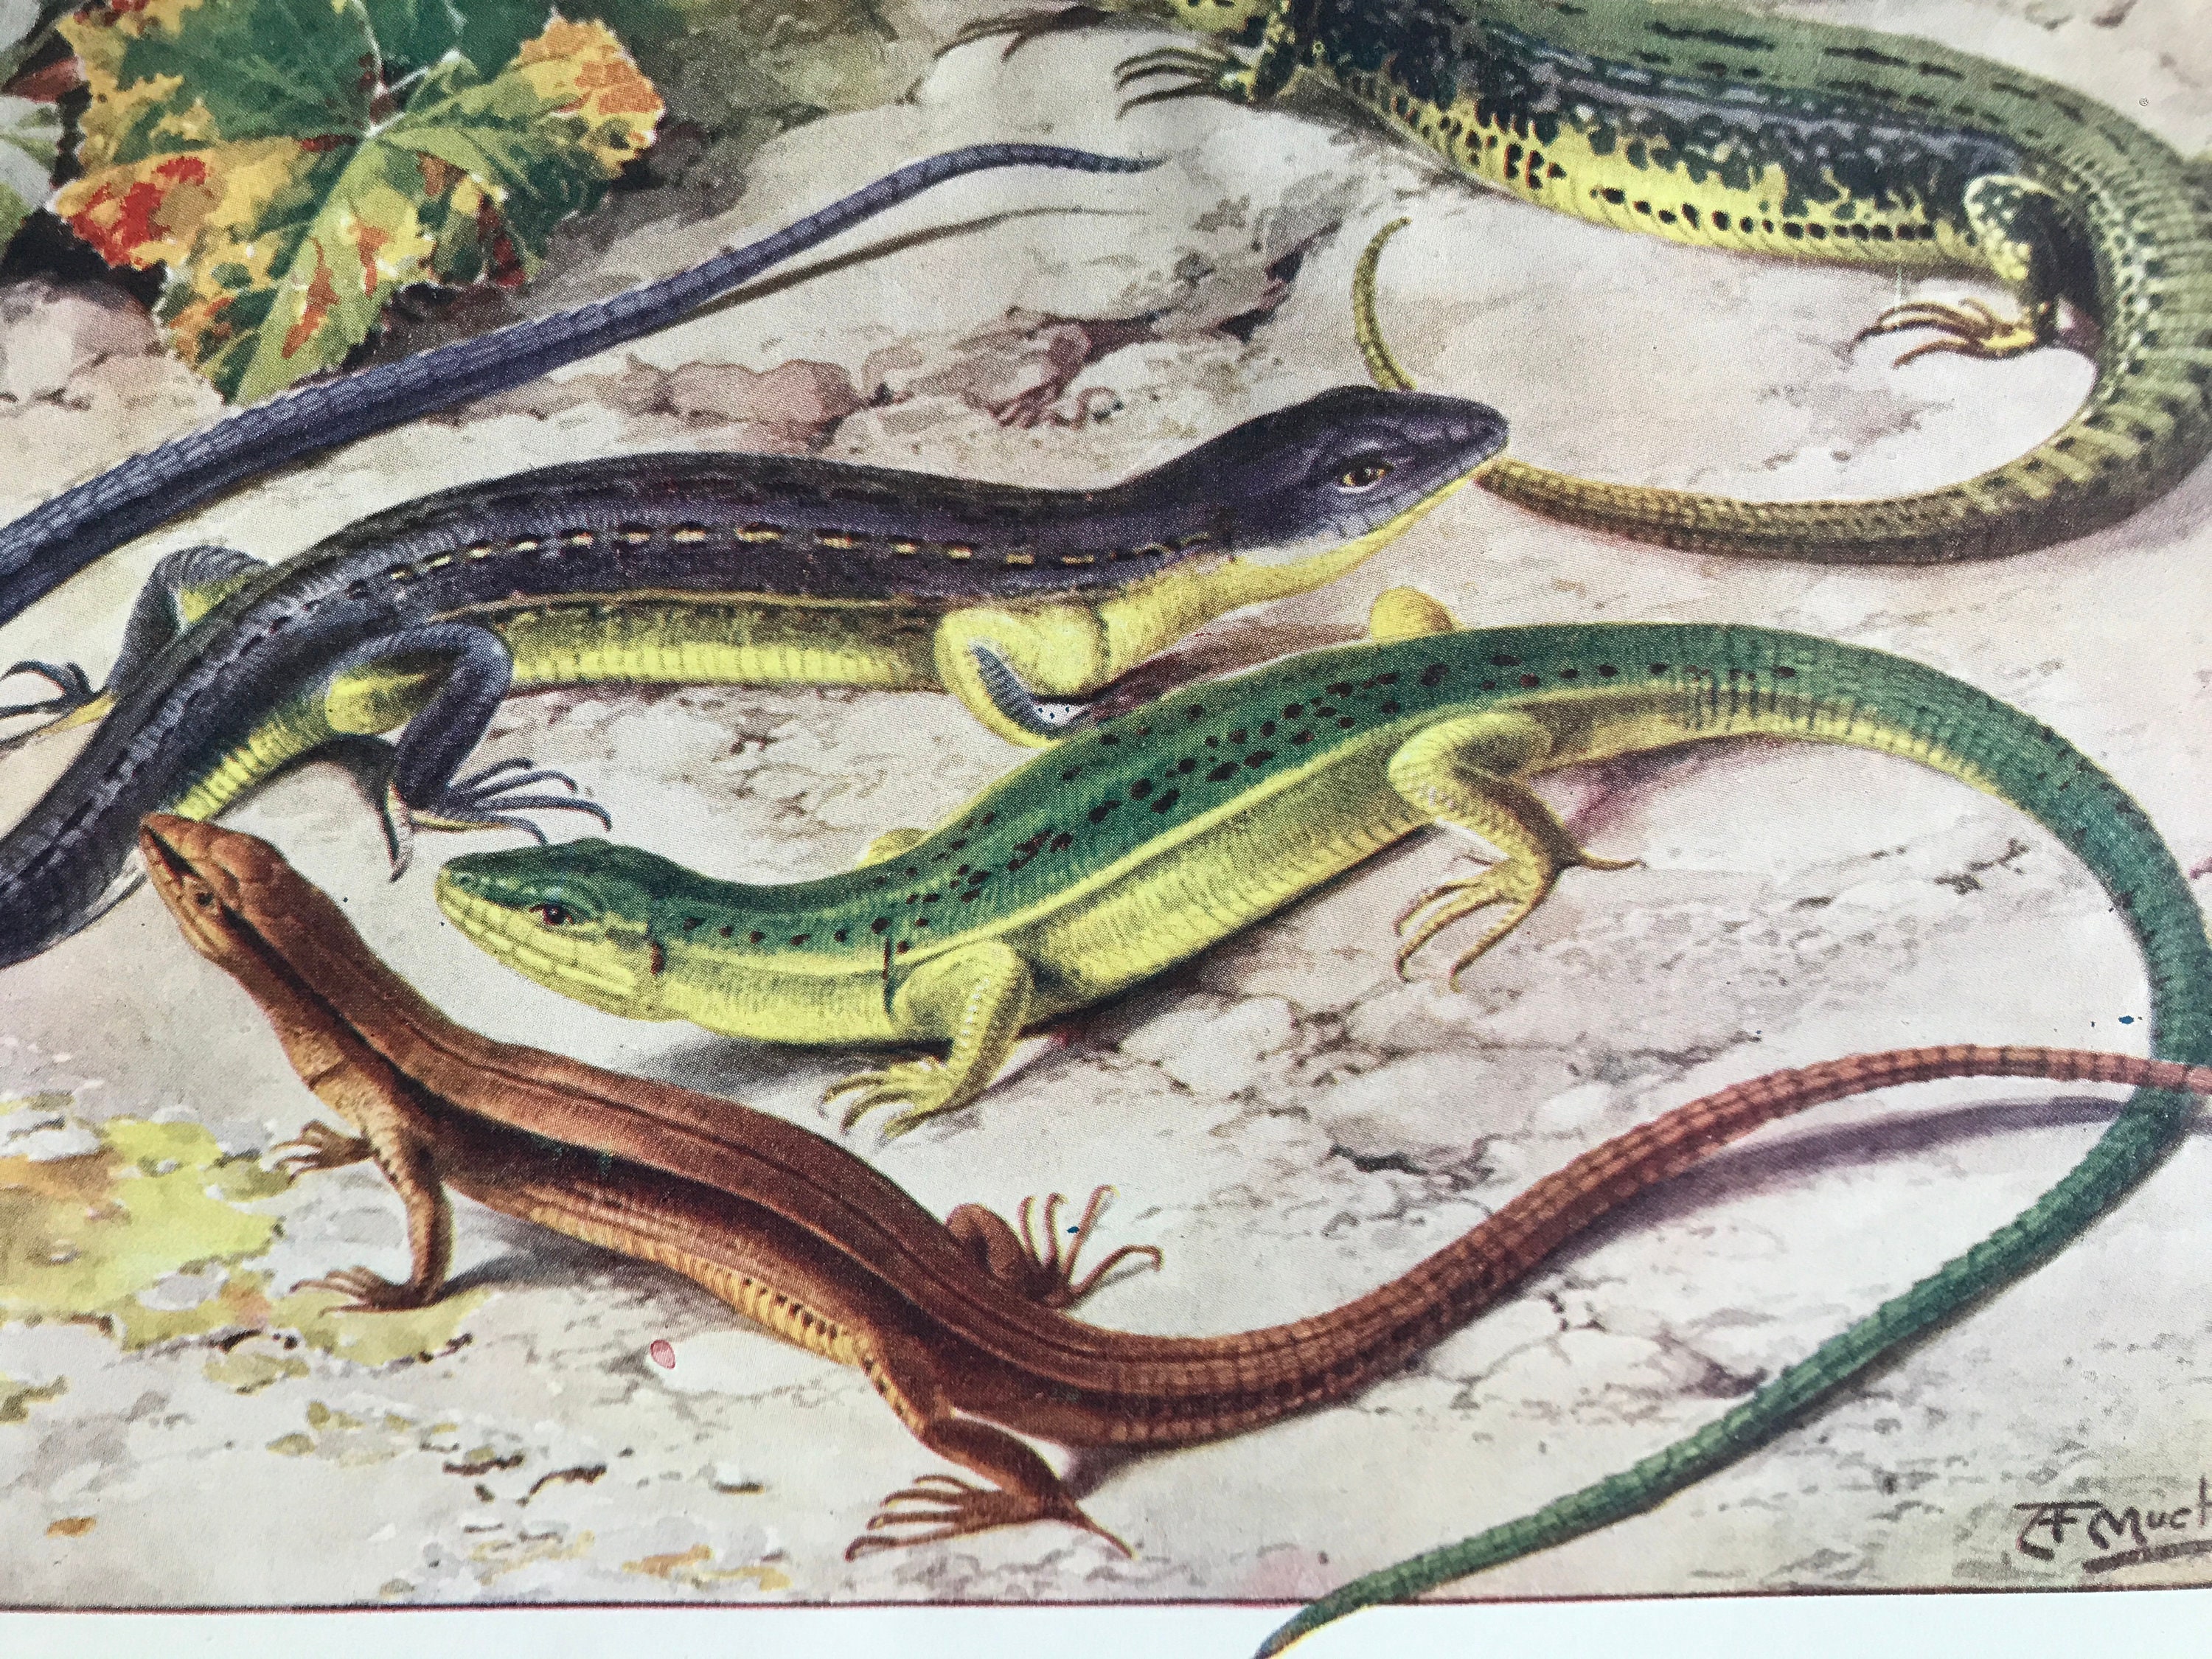 VIVIPAROUS or COMMON Lizard Antique Print Matted/ Mounted 1890s Black and White Engraving